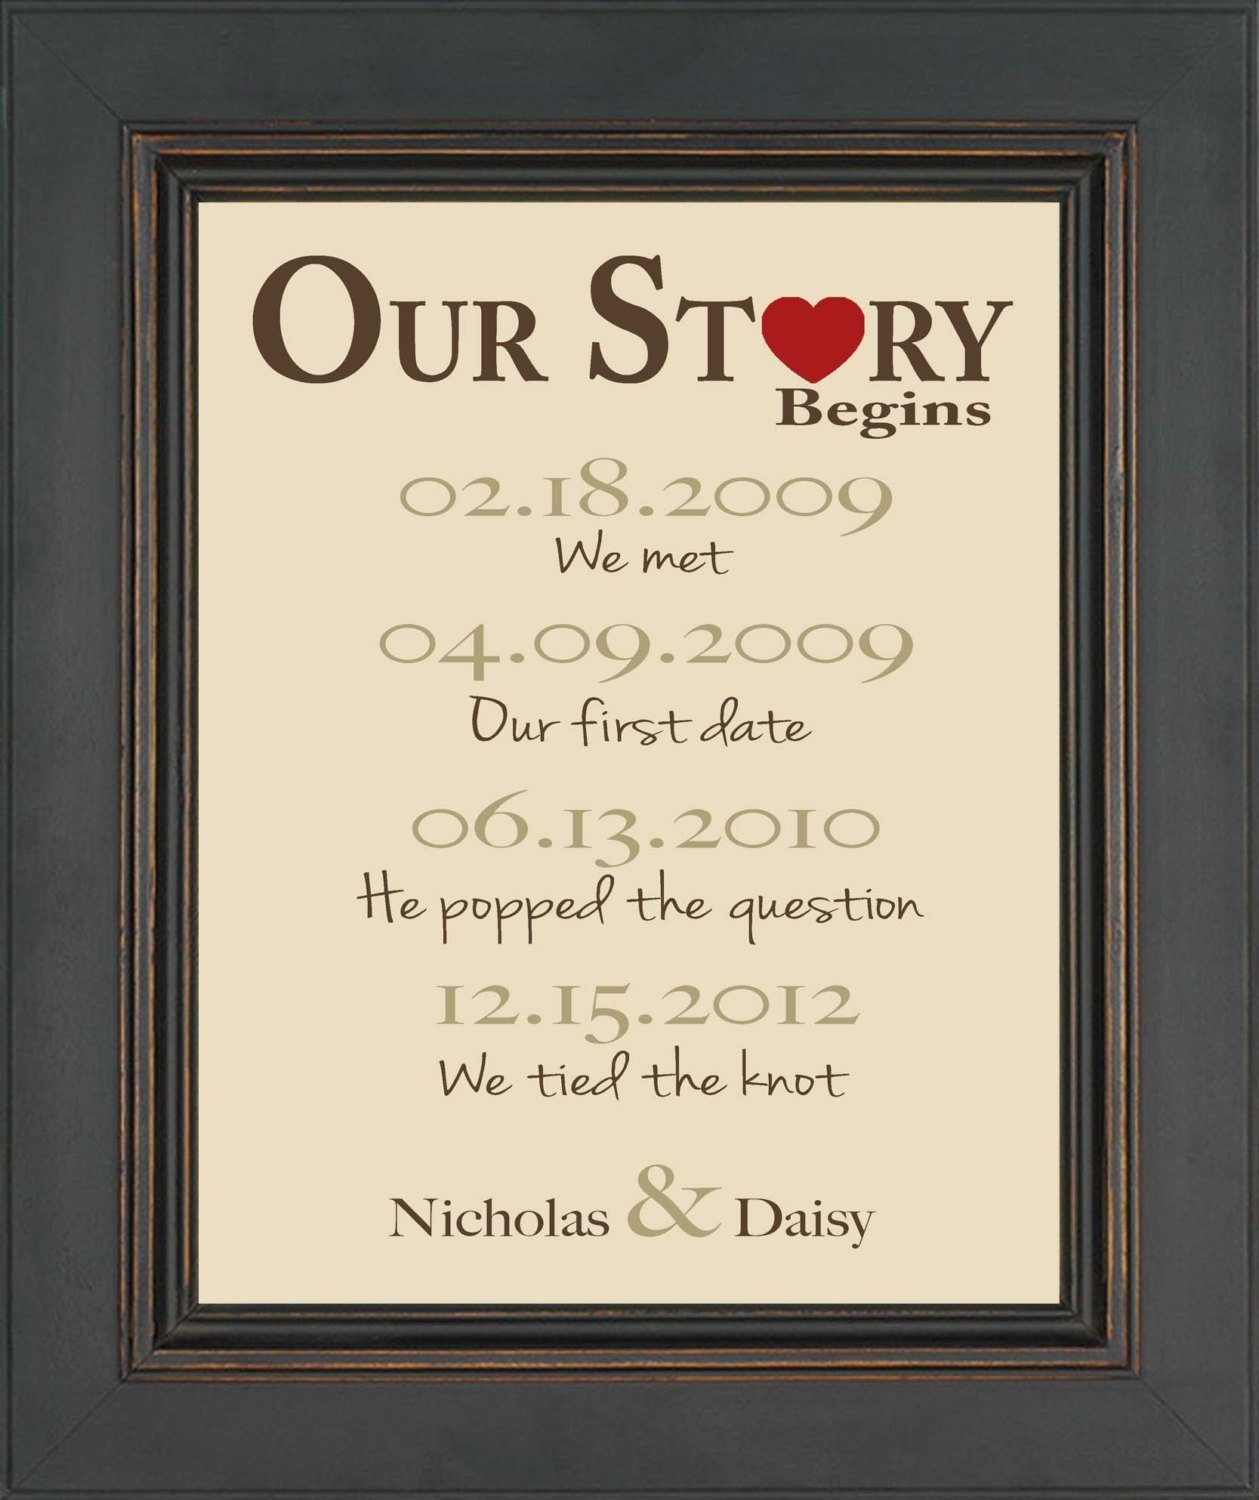 One Year Wedding Anniversary Gifts For Him
 10 Unique First Anniversary Gift Ideas Husband 2021